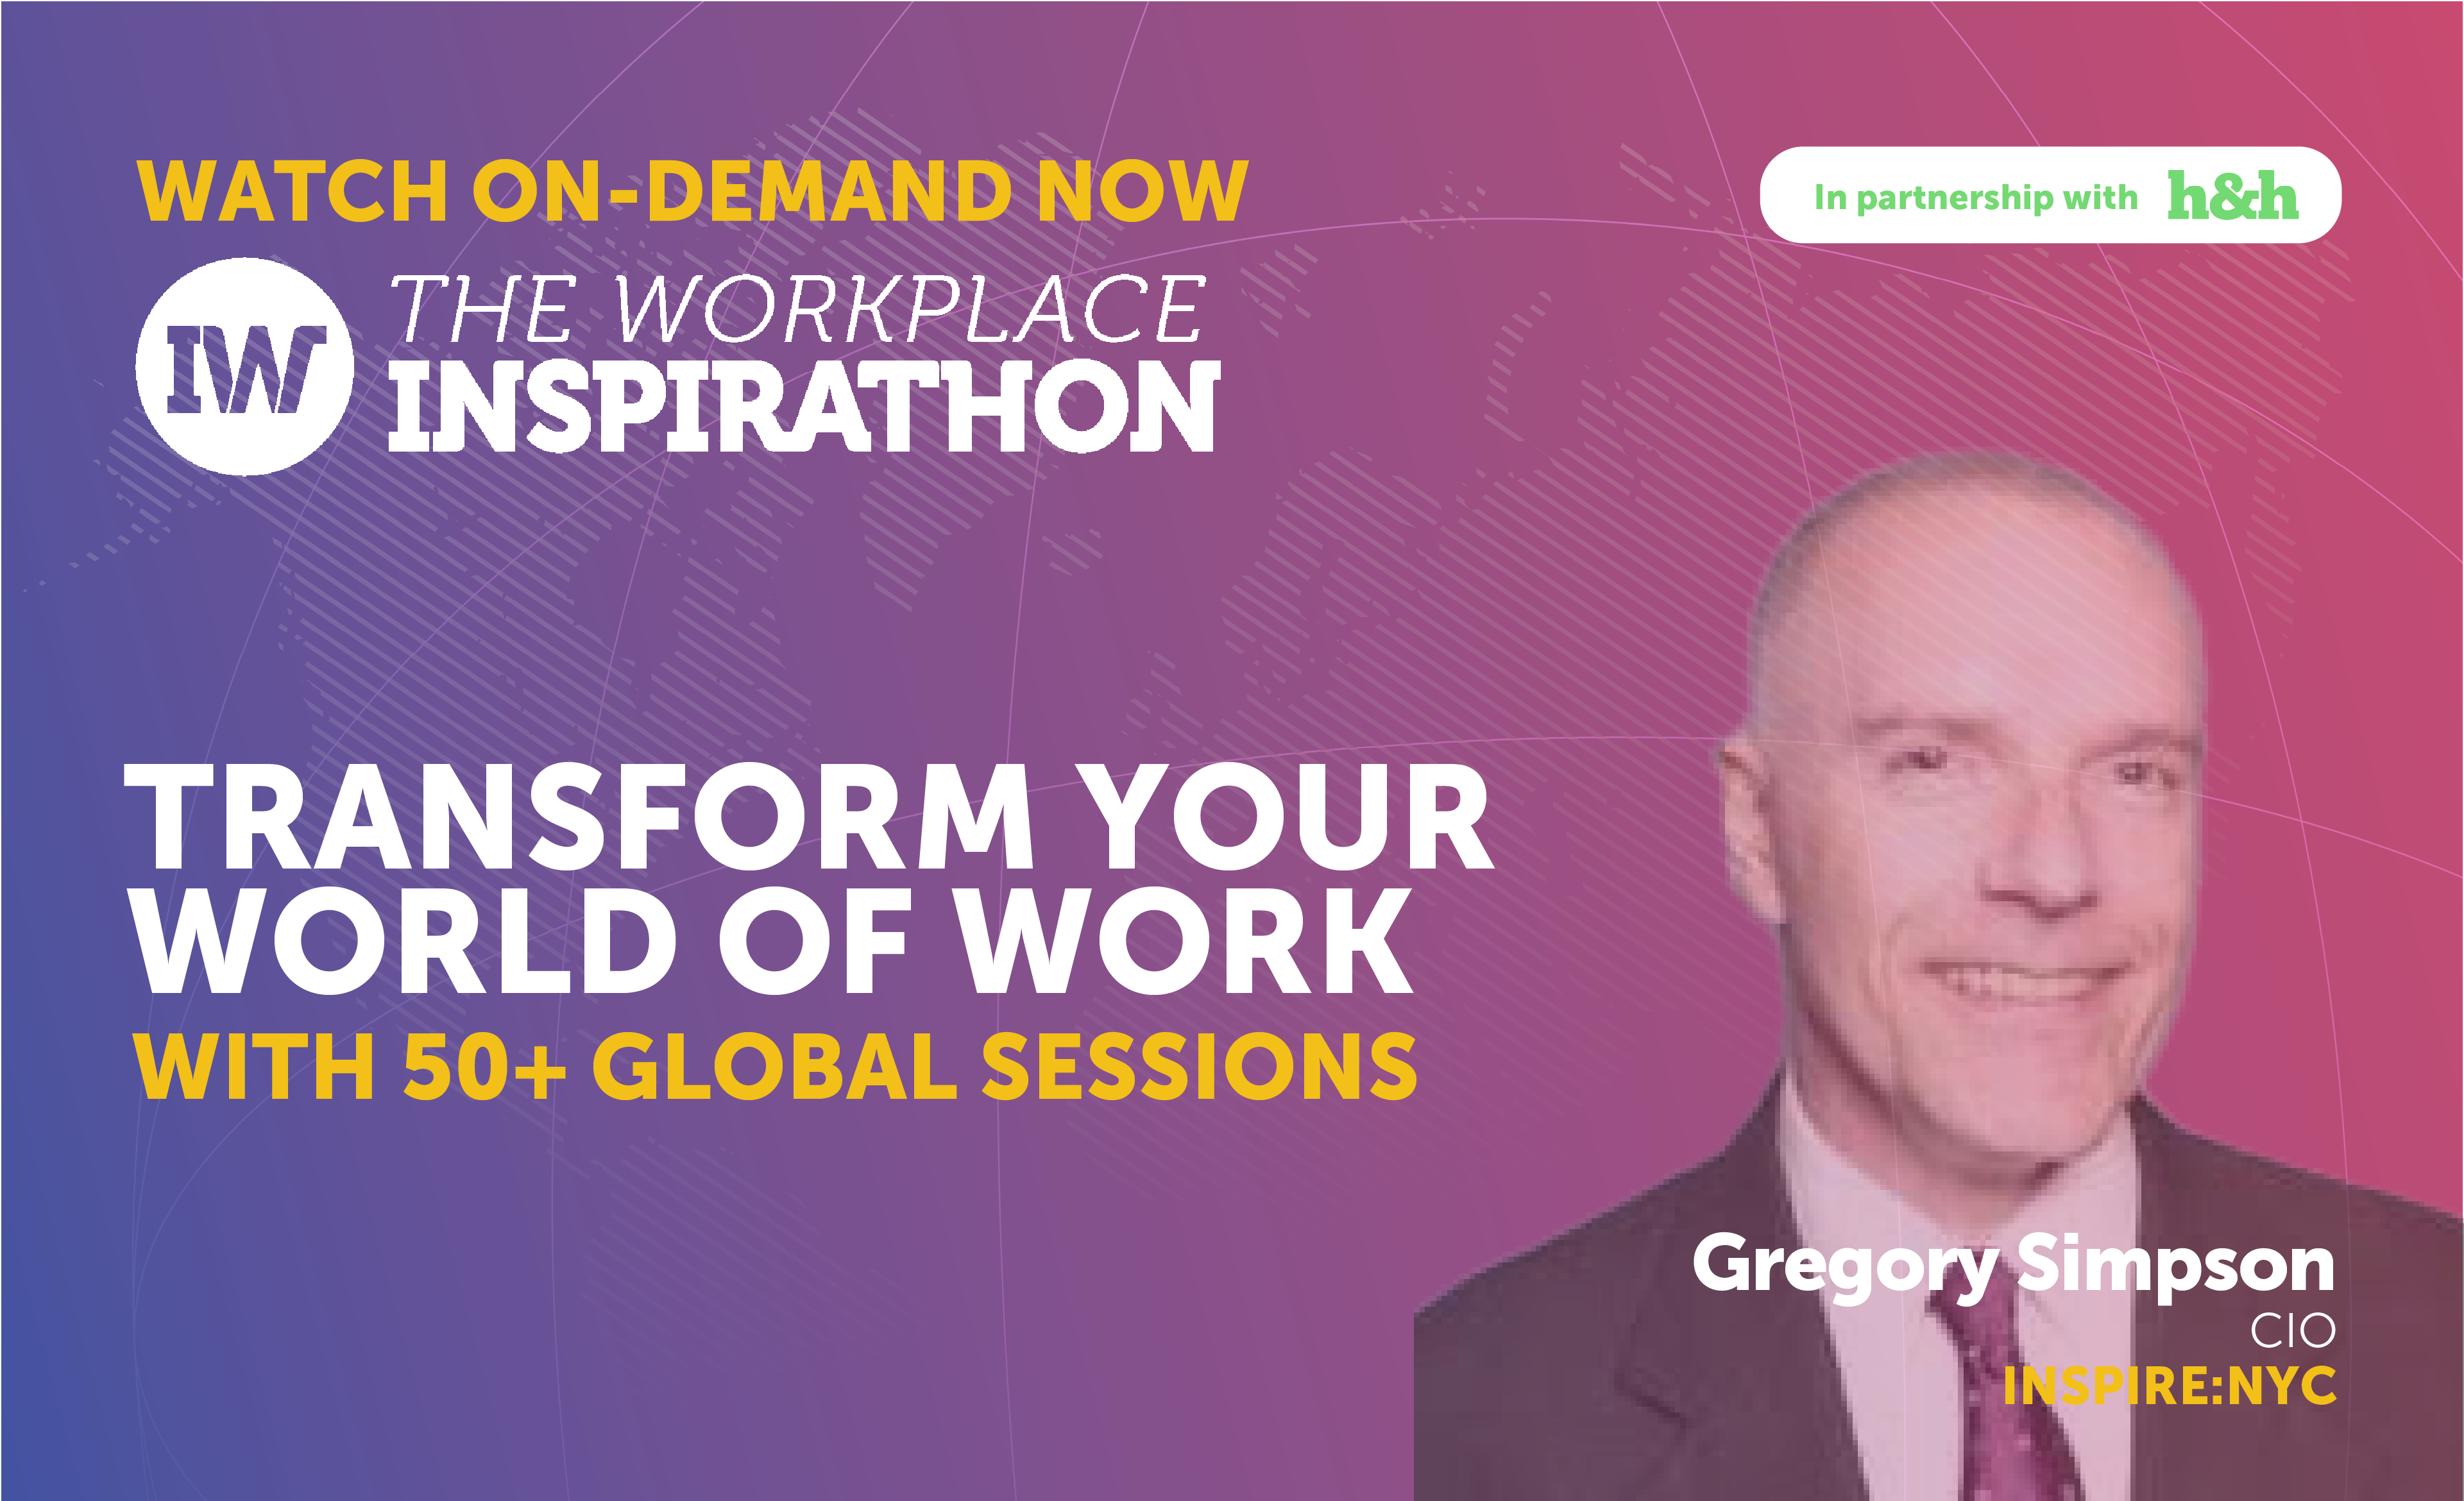 On Demand Video: Employee Experience Leadership Conversations | Gregory Simpson